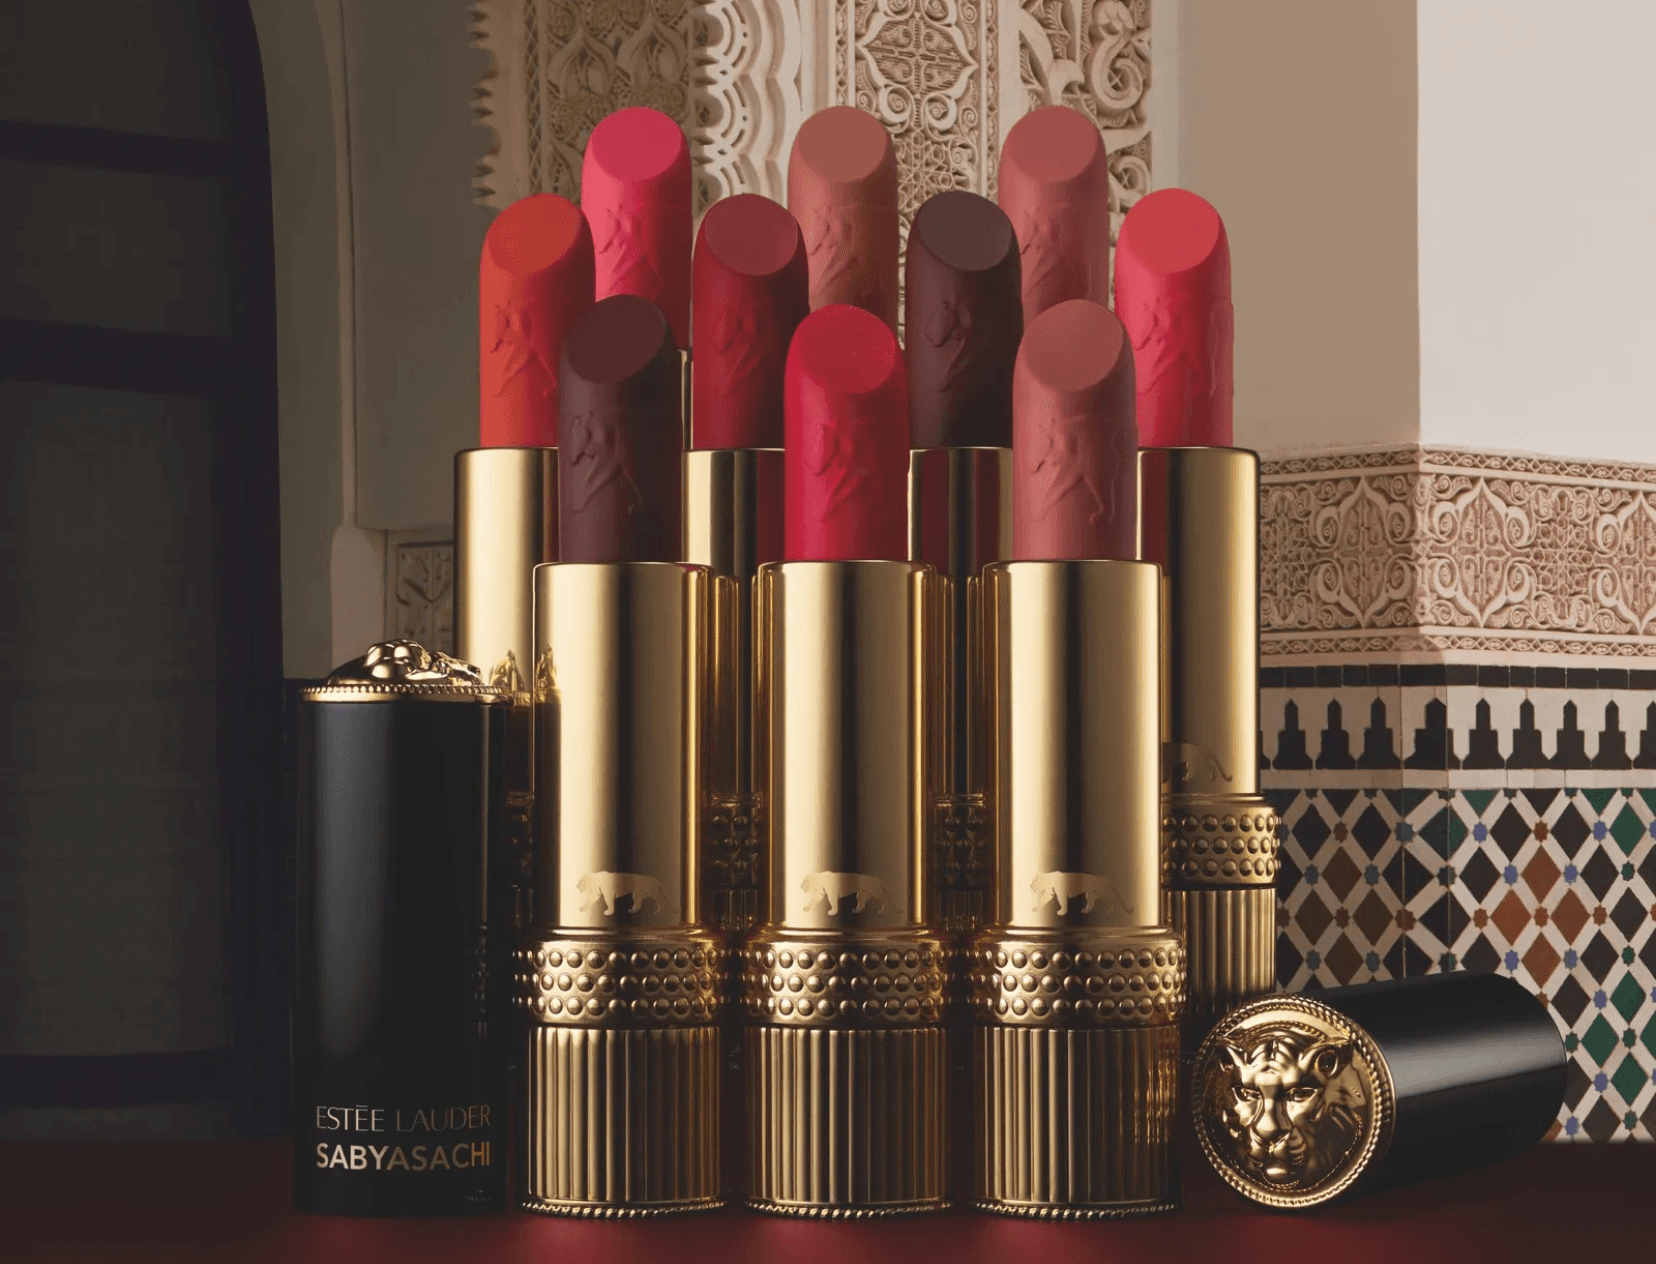 Everything You Need To Know About The Estée Lauder X Sabyasachi Lipstick Collab